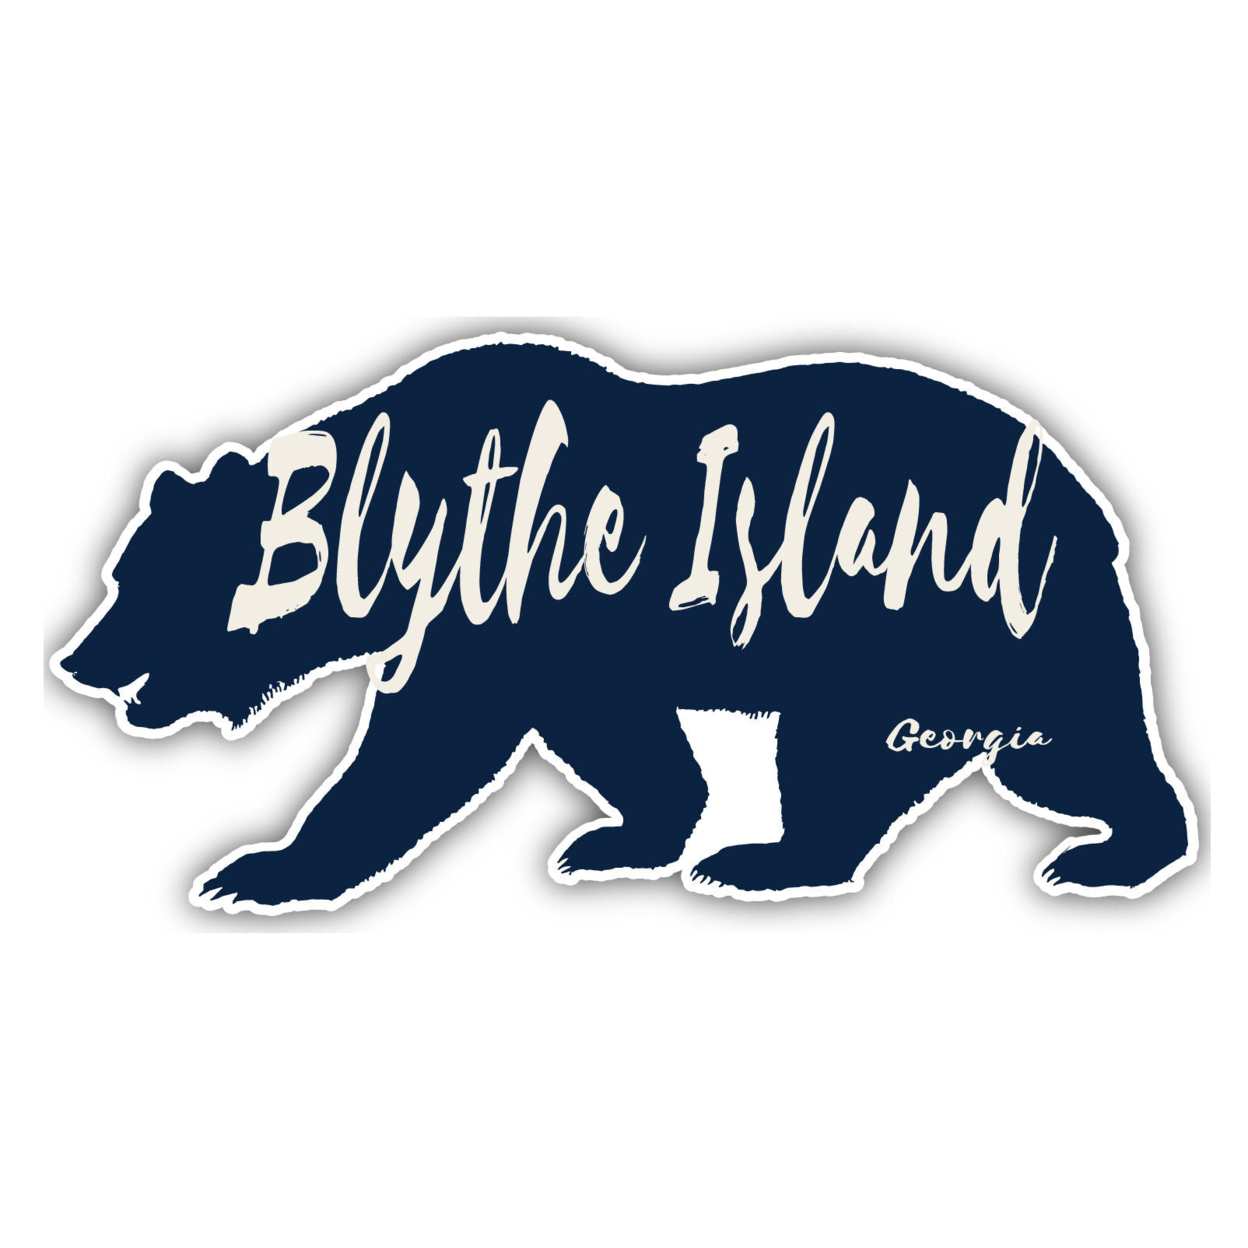 Blythe Island Georgia Souvenir Decorative Stickers (Choose Theme And Size) - 4-Pack, 10-Inch, Tent